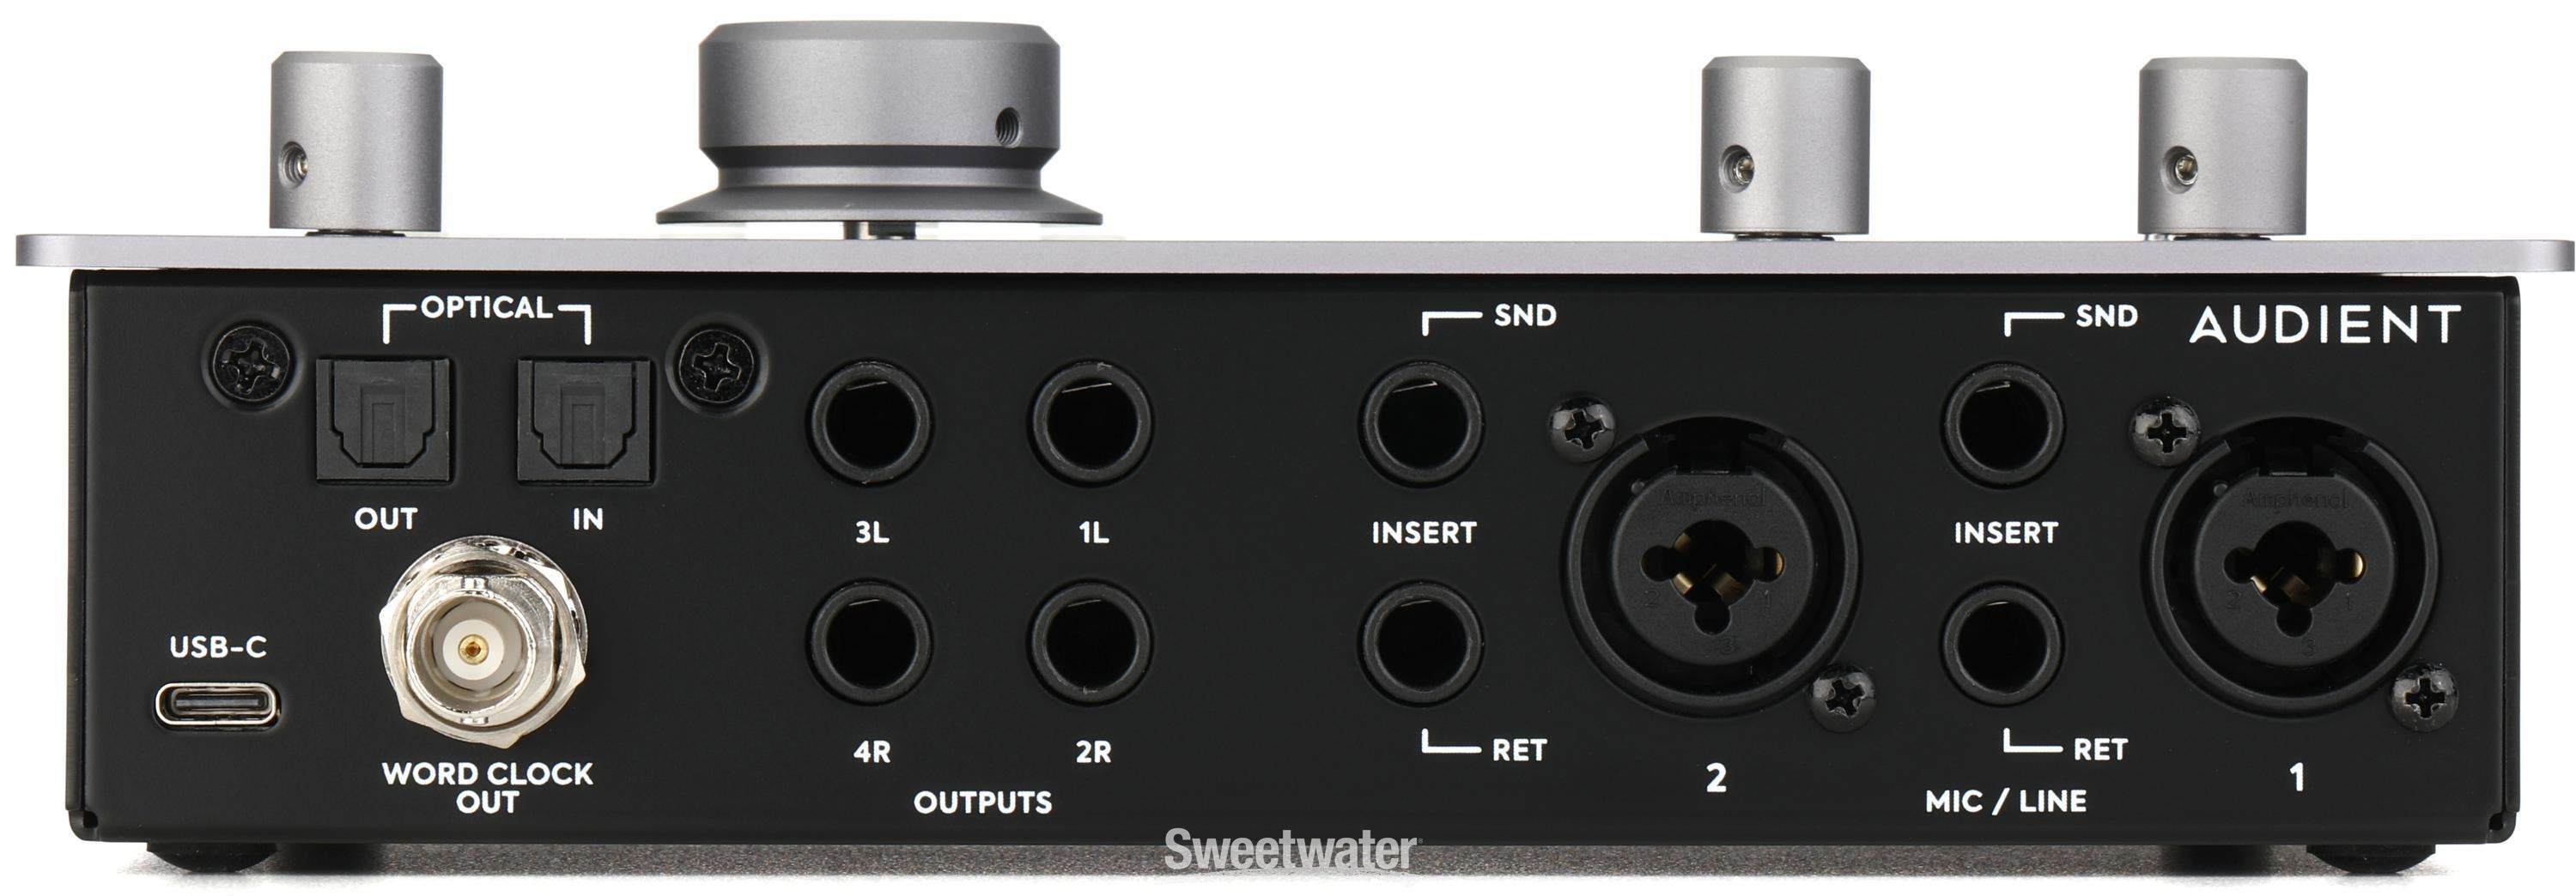 Audient iD24 10 x 14 USB-C Audio Interface | Sweetwater